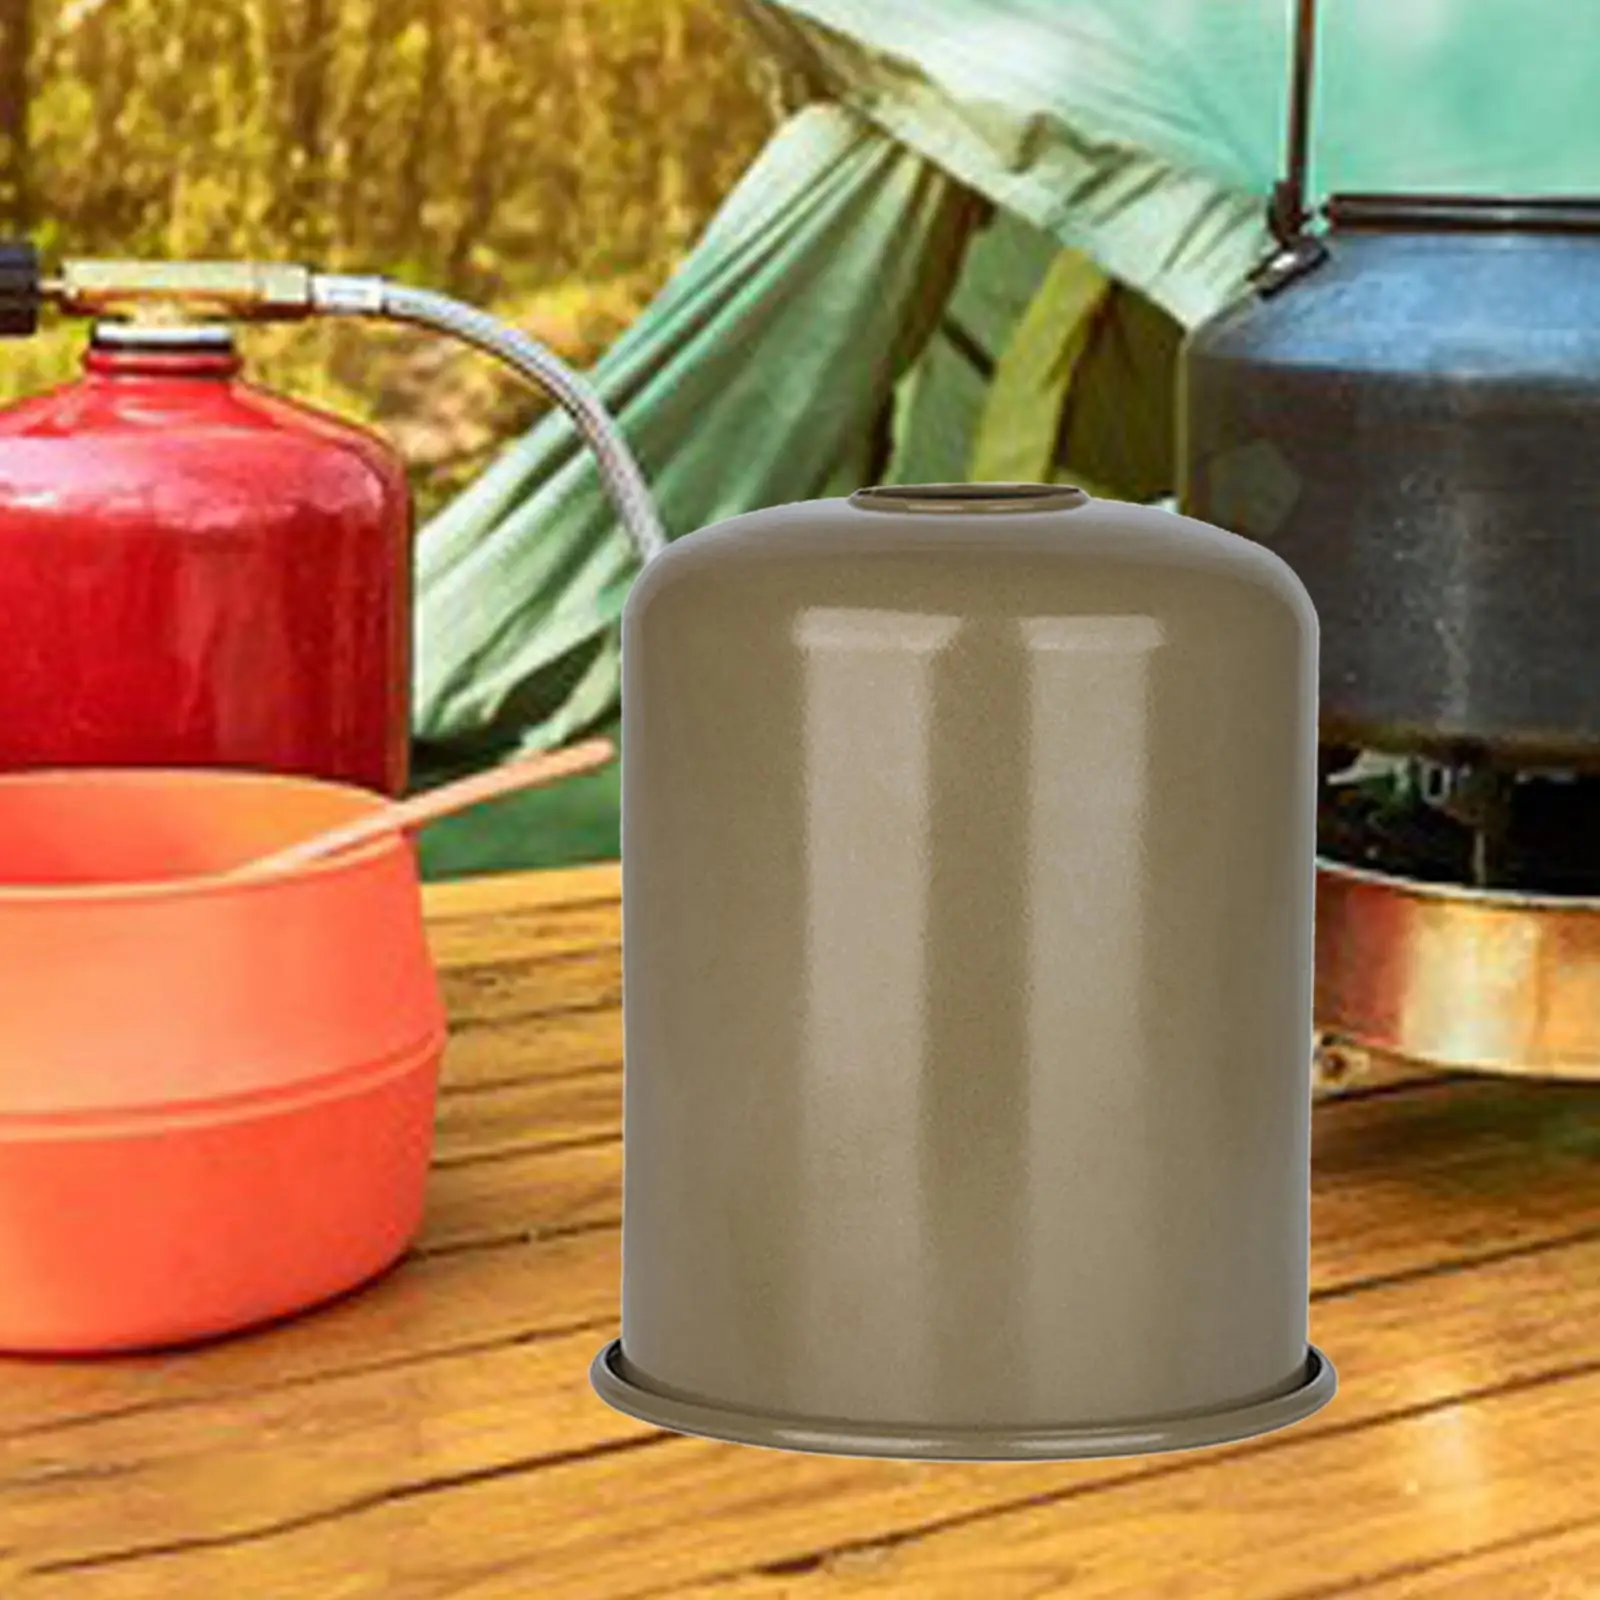 Canister Tank Cover Protector Waterproof Picnic Portable for Outdoor Camping Cooking BBQ Weather Resistant Metal 1x Gas Can Case